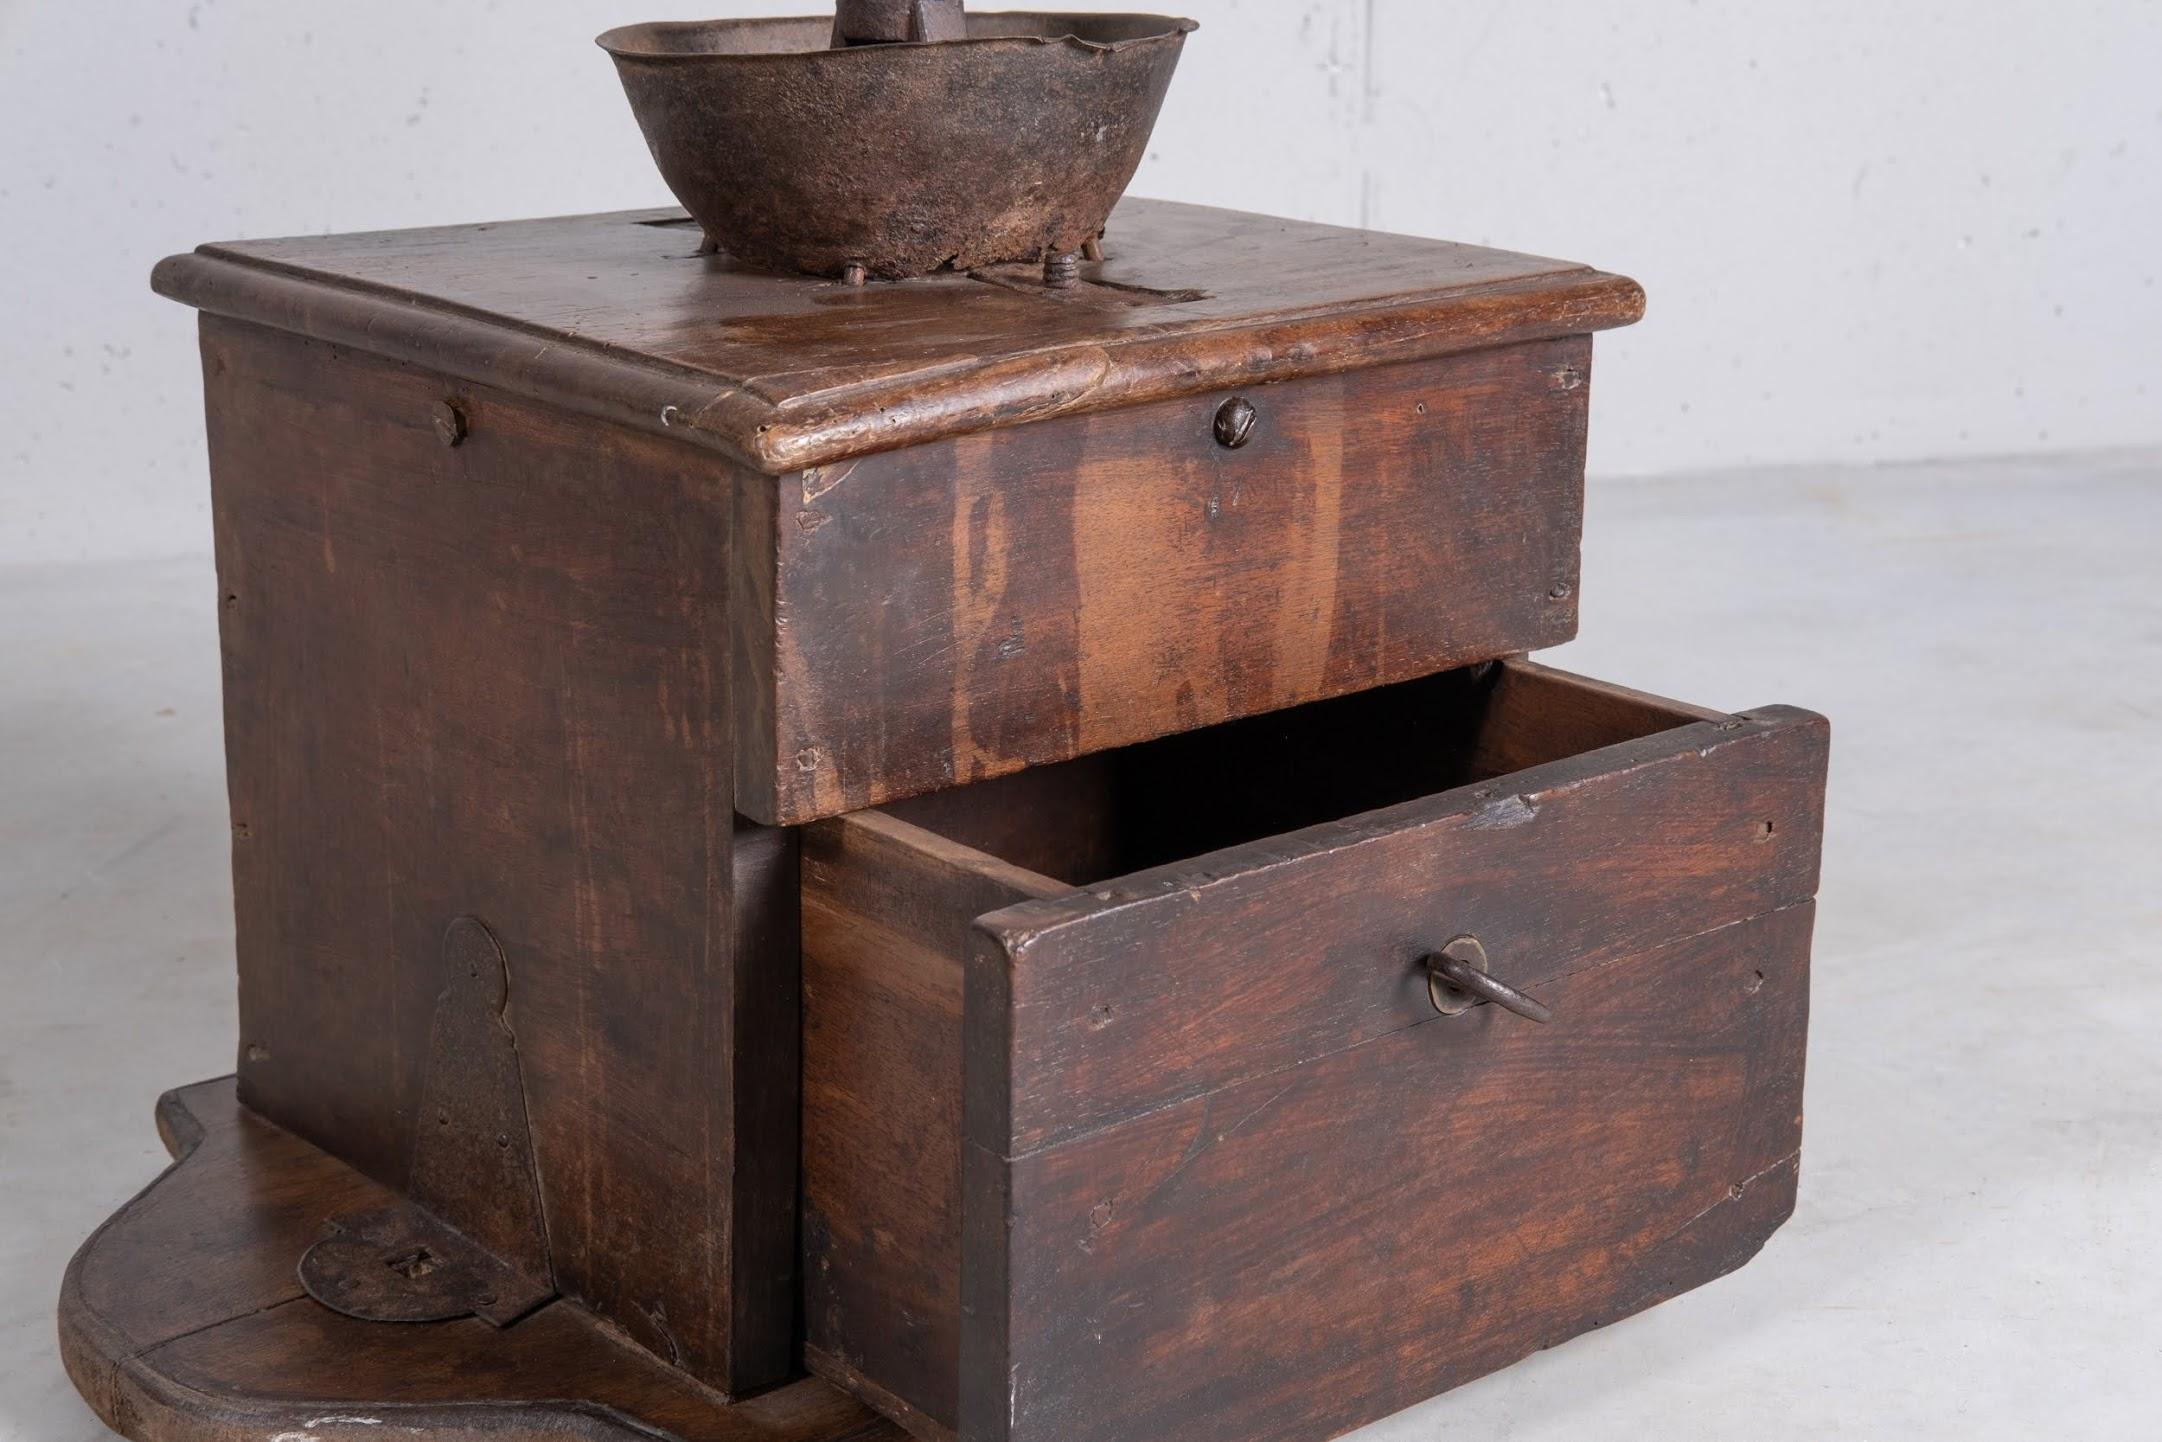 Italian Wooden Coffee Grinder, Italy, circa 1700 For Sale